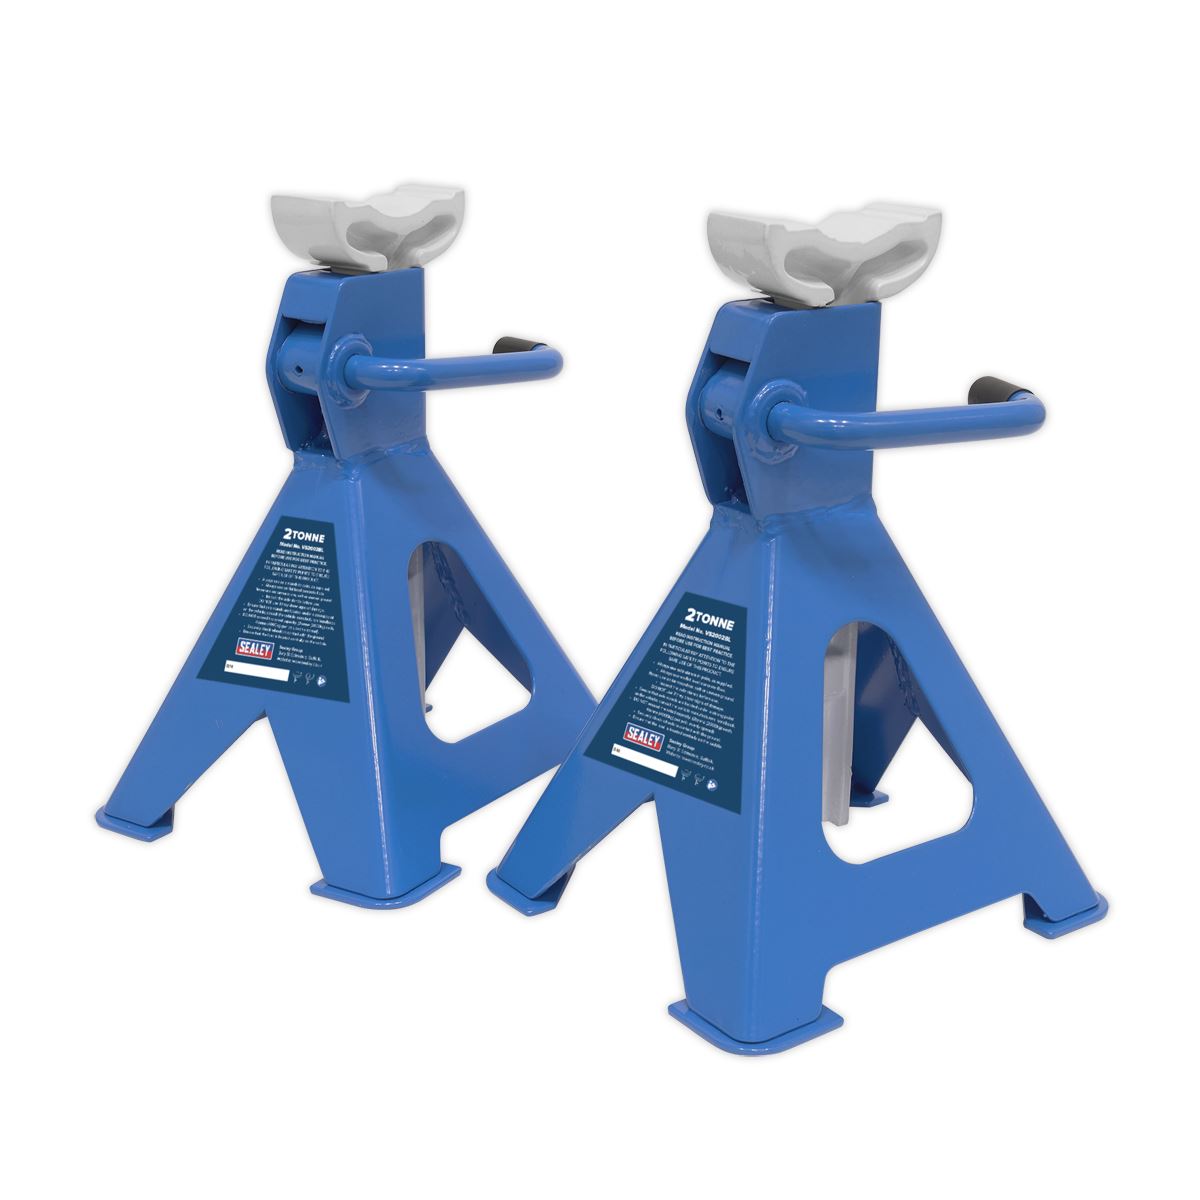 Sealey Ratchet Type Axle Stands (Pair) 2 Tonne Capacity per Stand - Blue